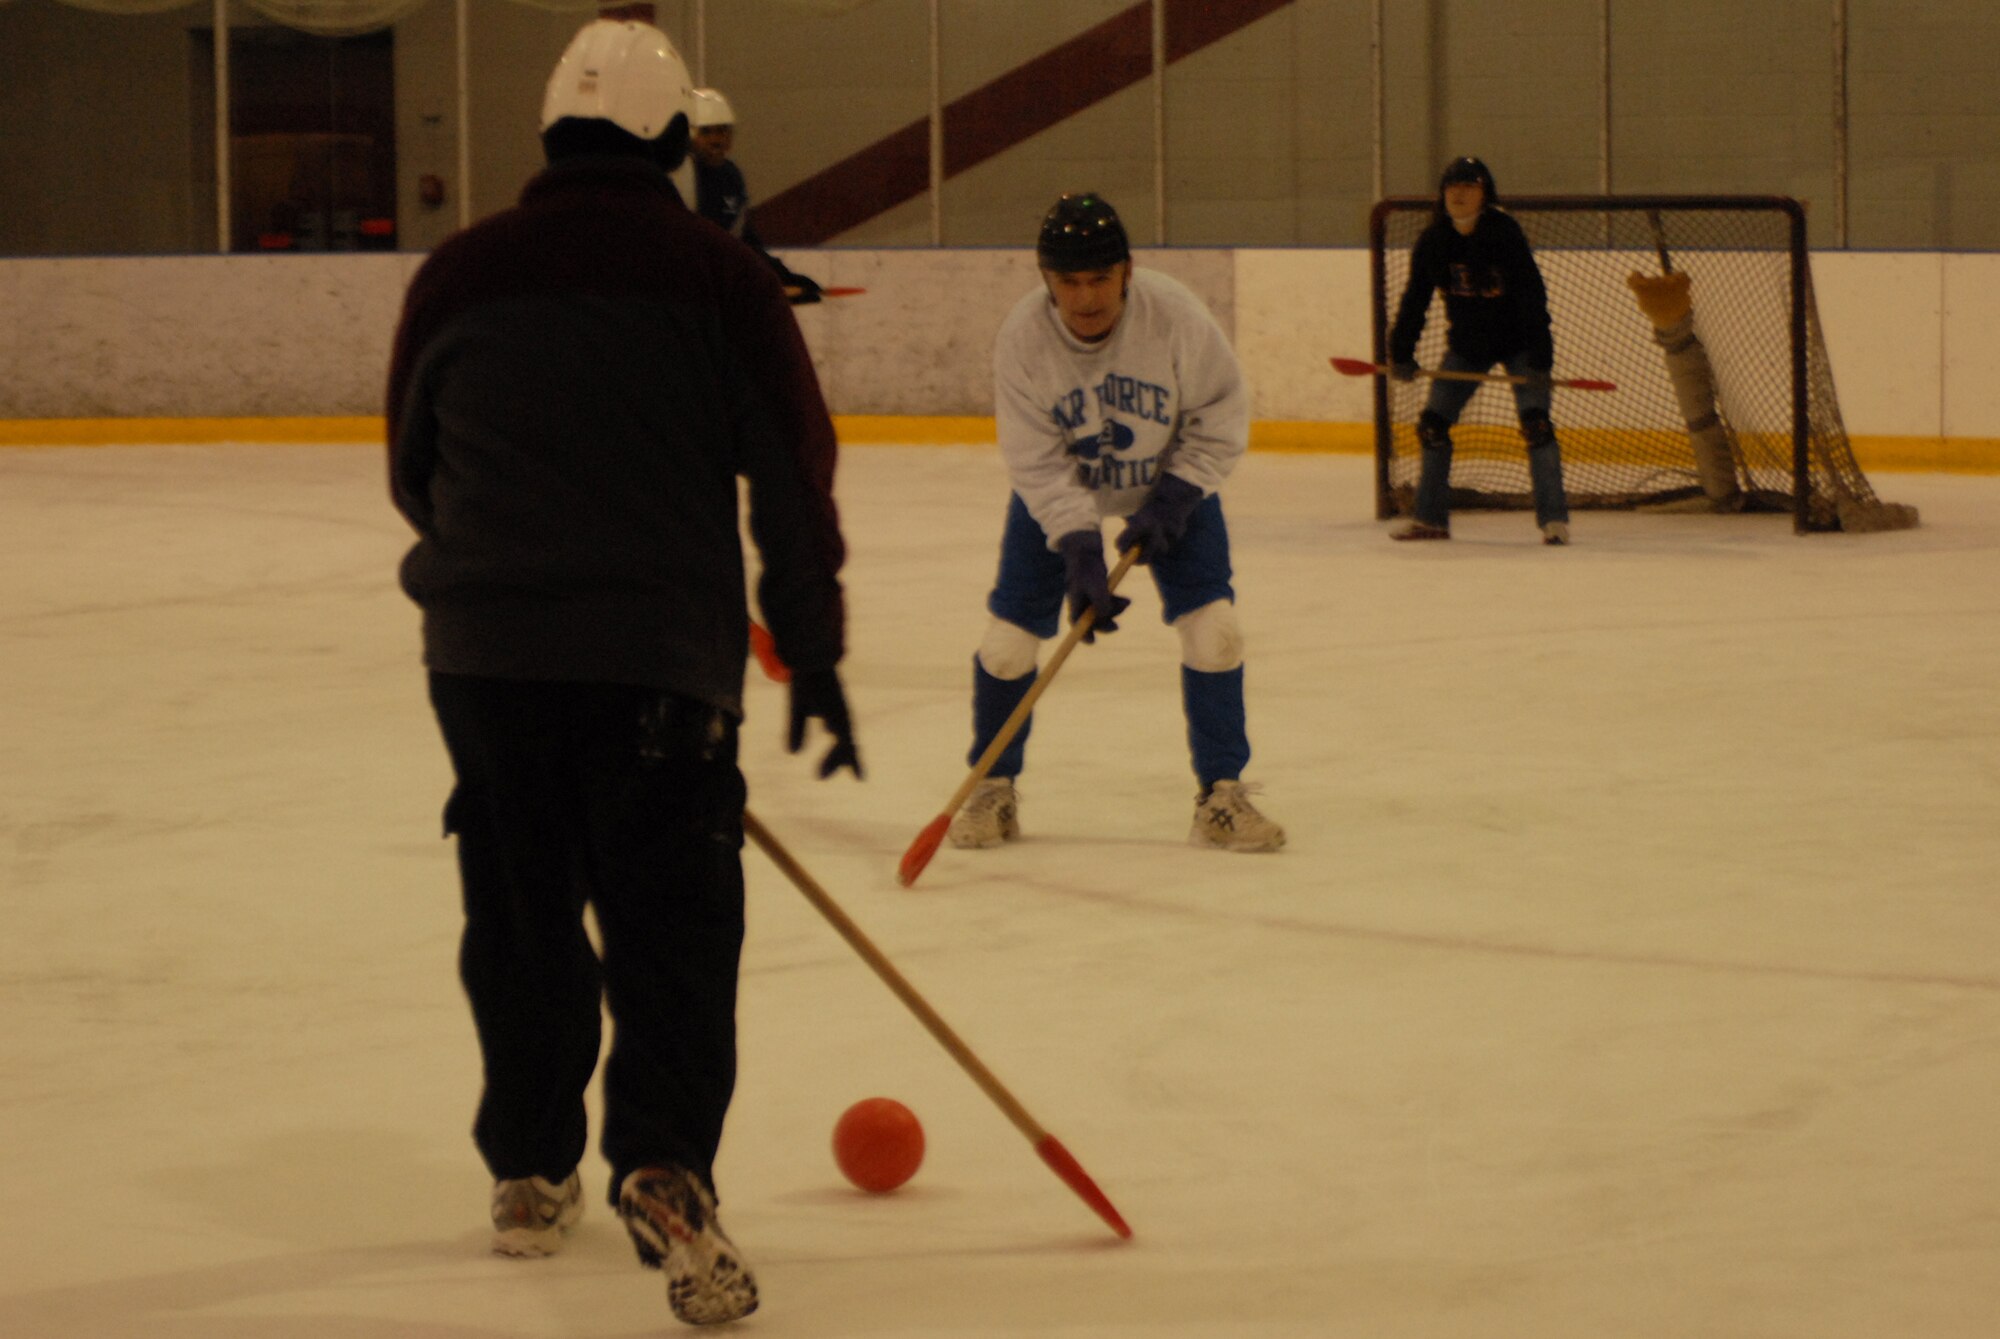 Col. John McDonald, 43rd Airlift Wing Commander, plays broomball with members of the 43rd Contracting Squadron Jan. 16 at Fort Bragg's Cleland Ice Rink. (U.S. Air Force Photo by 2nd Lt. Chris Hoyler)